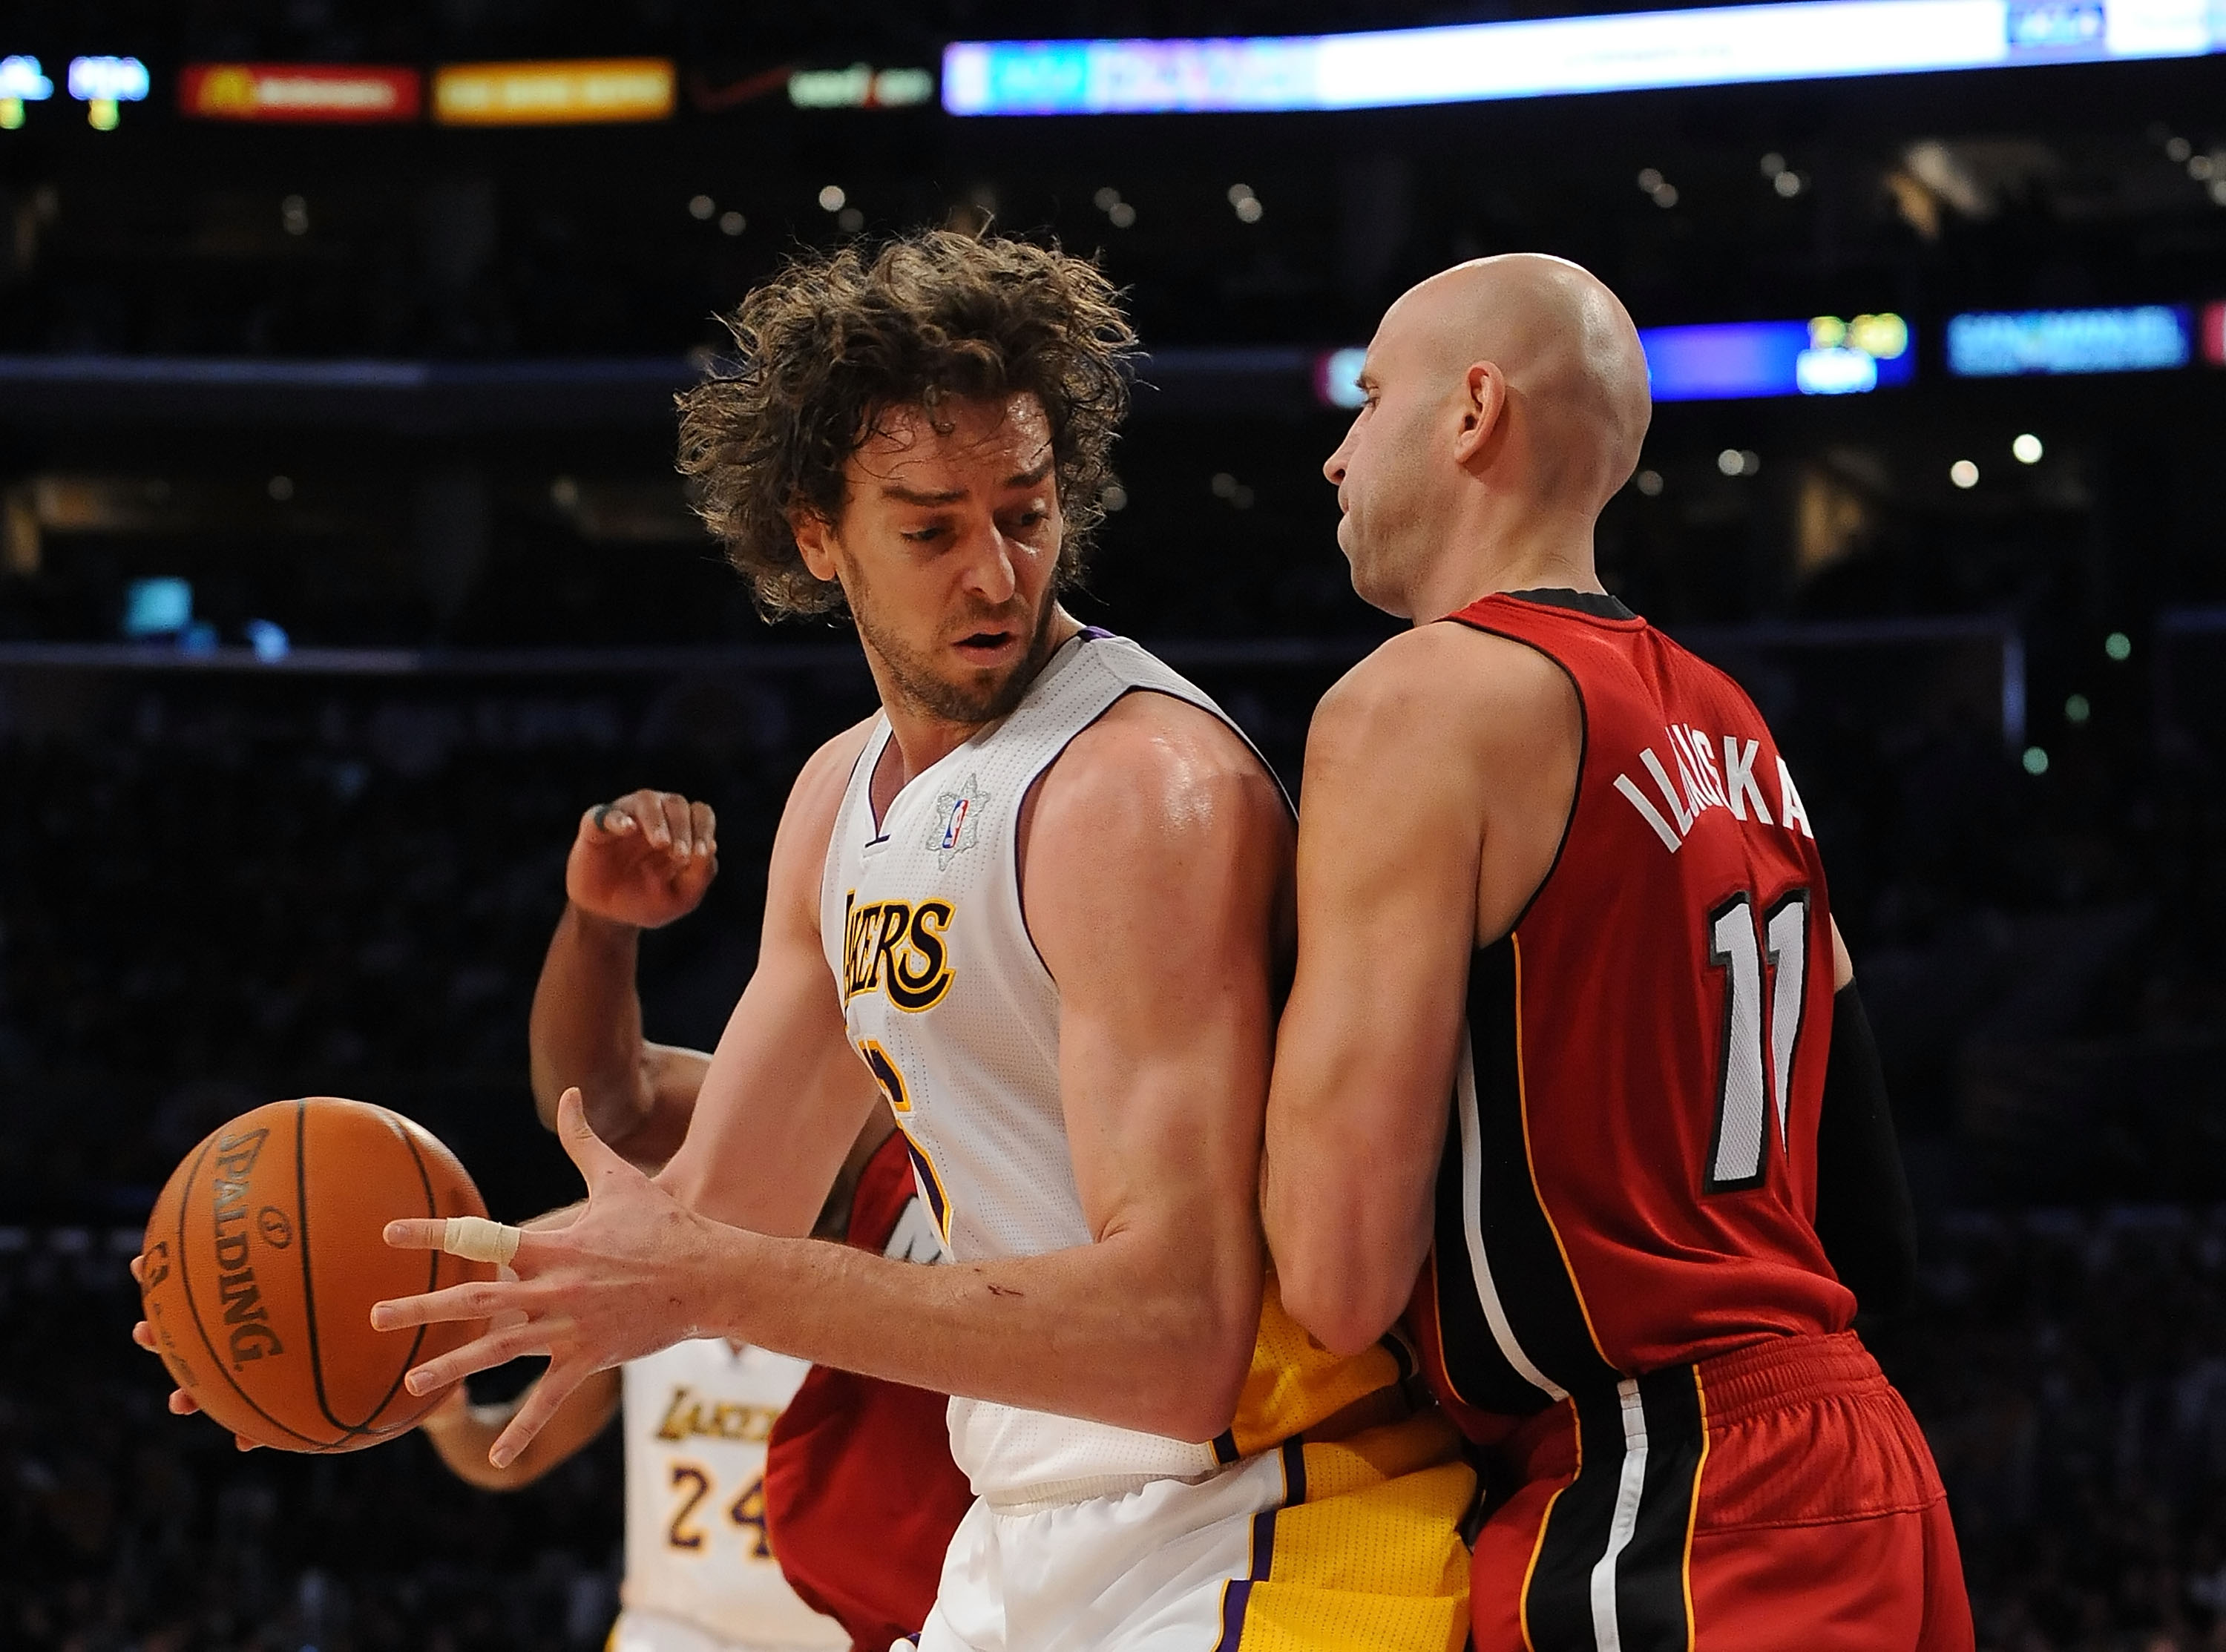 Miami Heat small forward LeBron James (6) keeps Los Angeles Lakers power  forward Pau Gasol (16) from getting the ball in the second half of their NBA  basketball game in Los Angeles